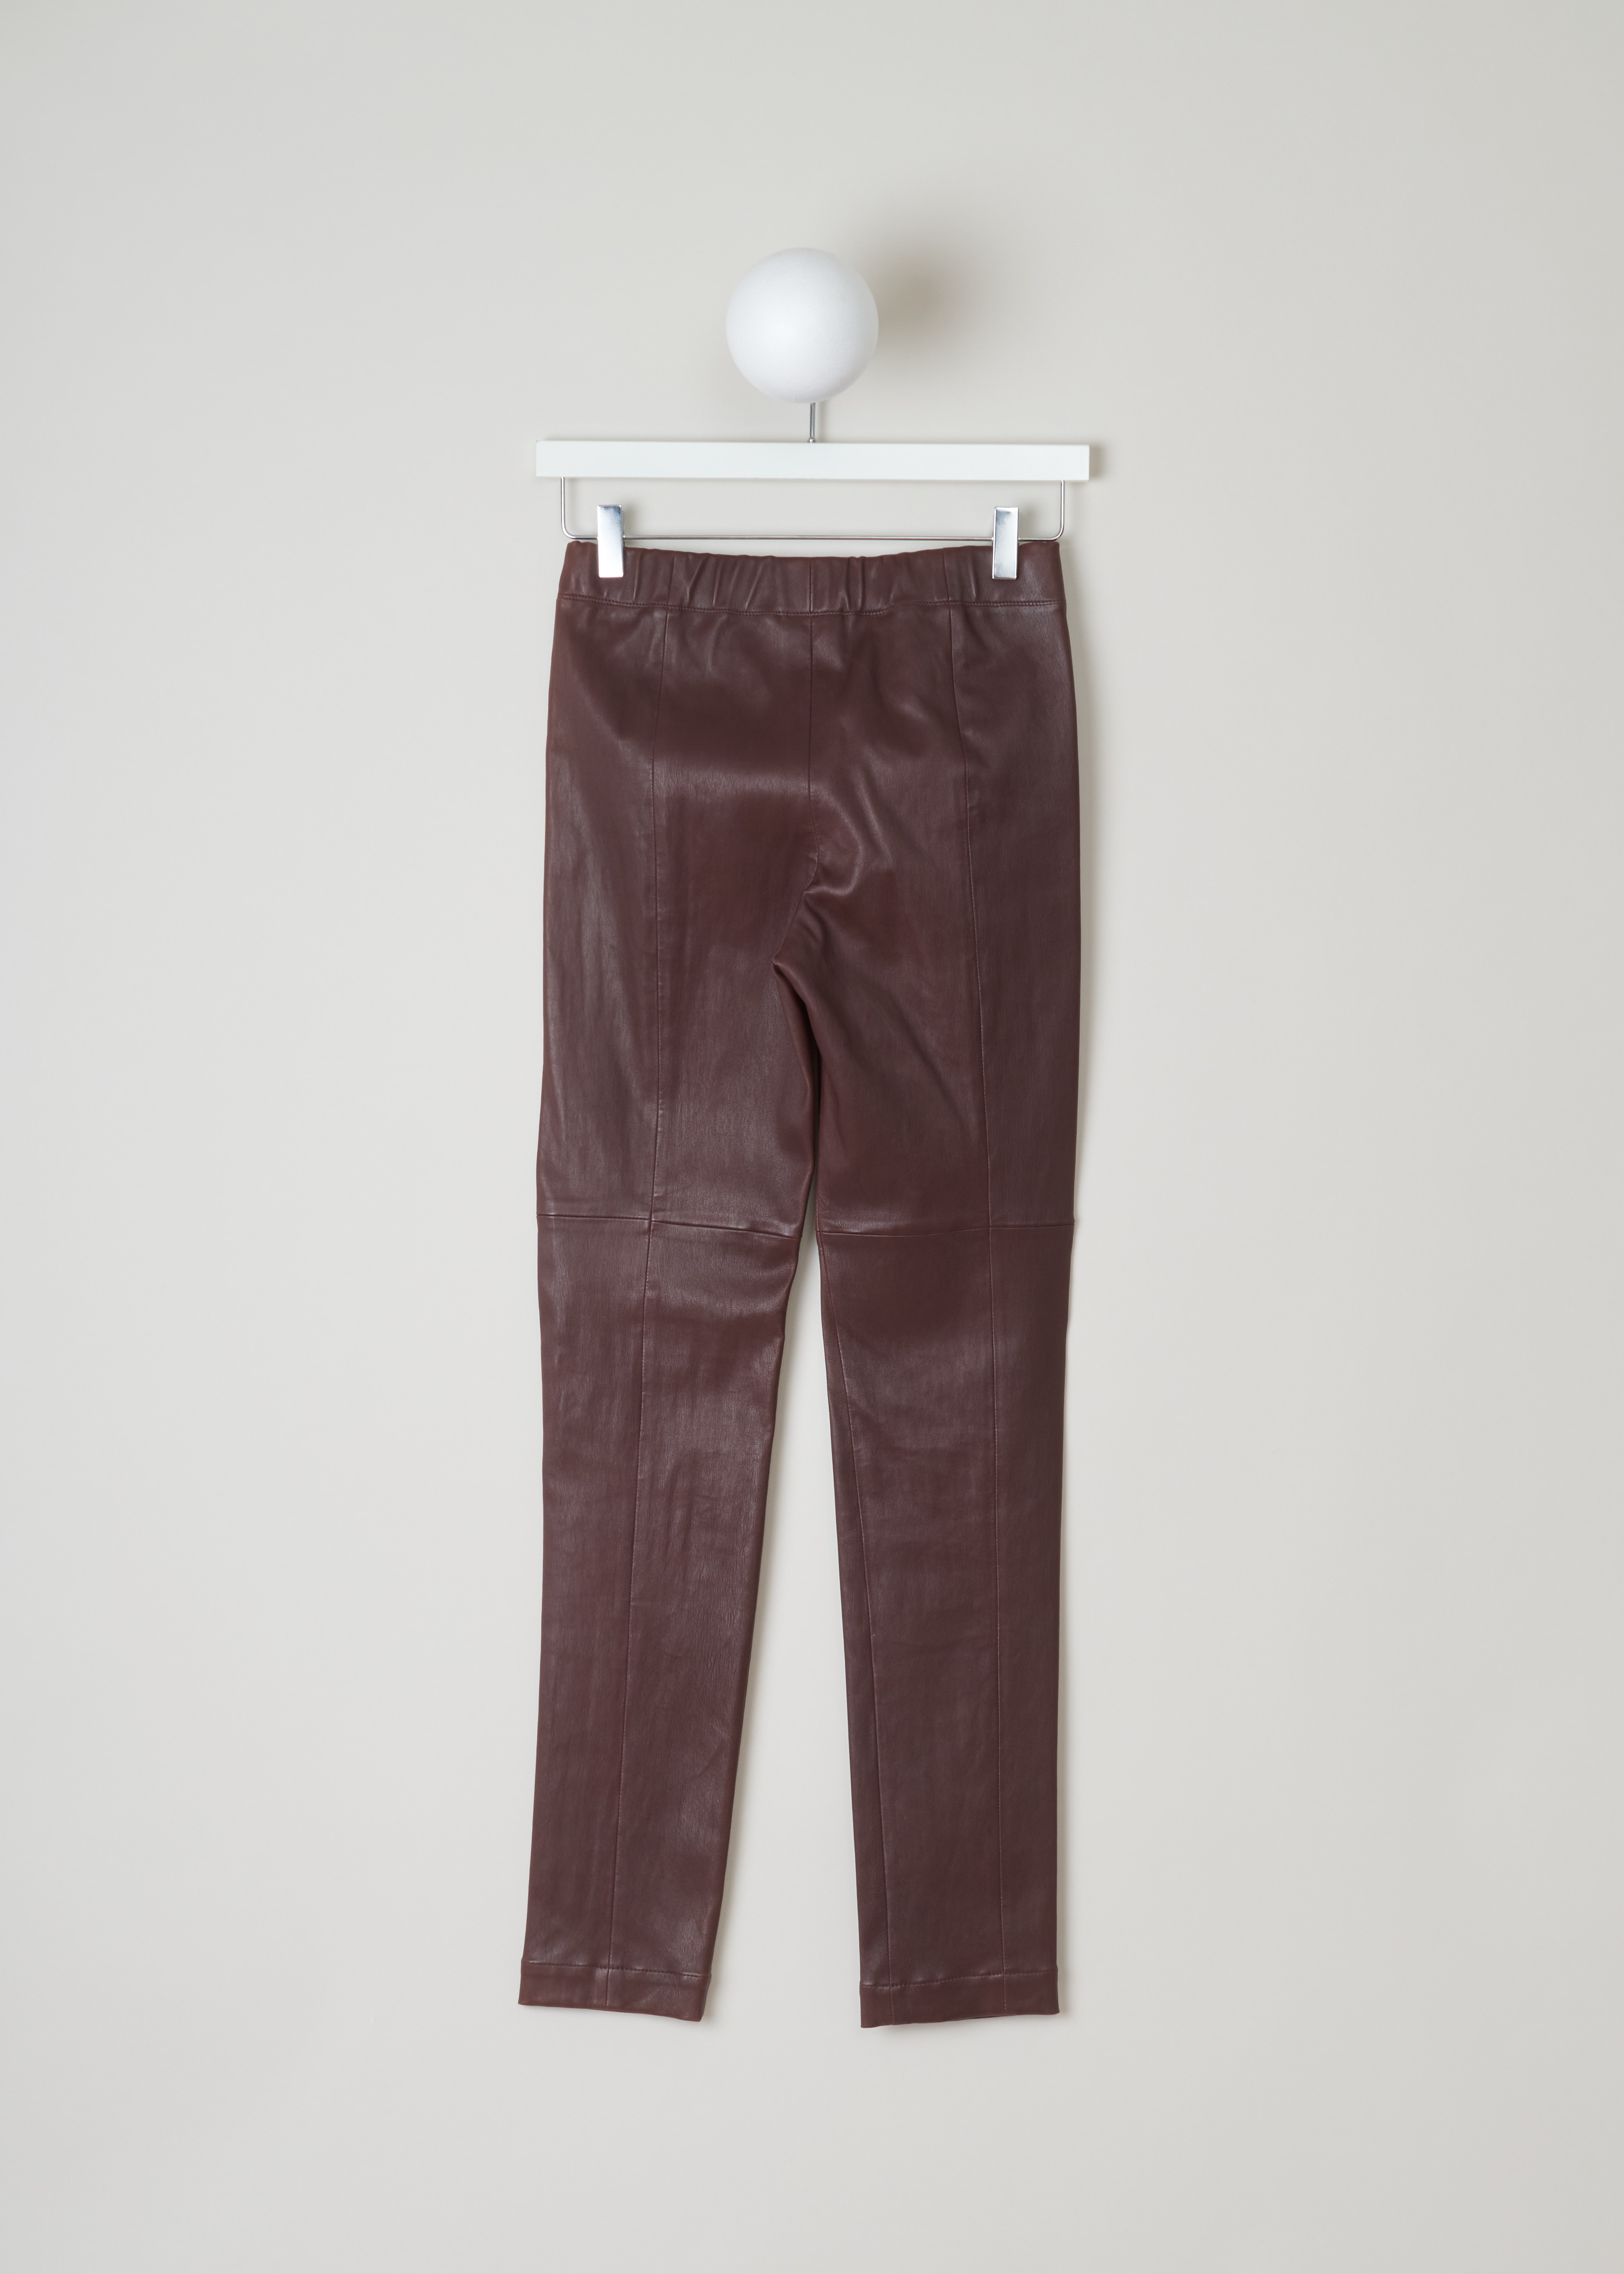 Brunello Cucinelli Elasticated leather Burgundy pants, M0V29P1329_C2630 burgundy back. Fitted leather pants with a light stretch in it has an ankle-length and an elastic waistband.